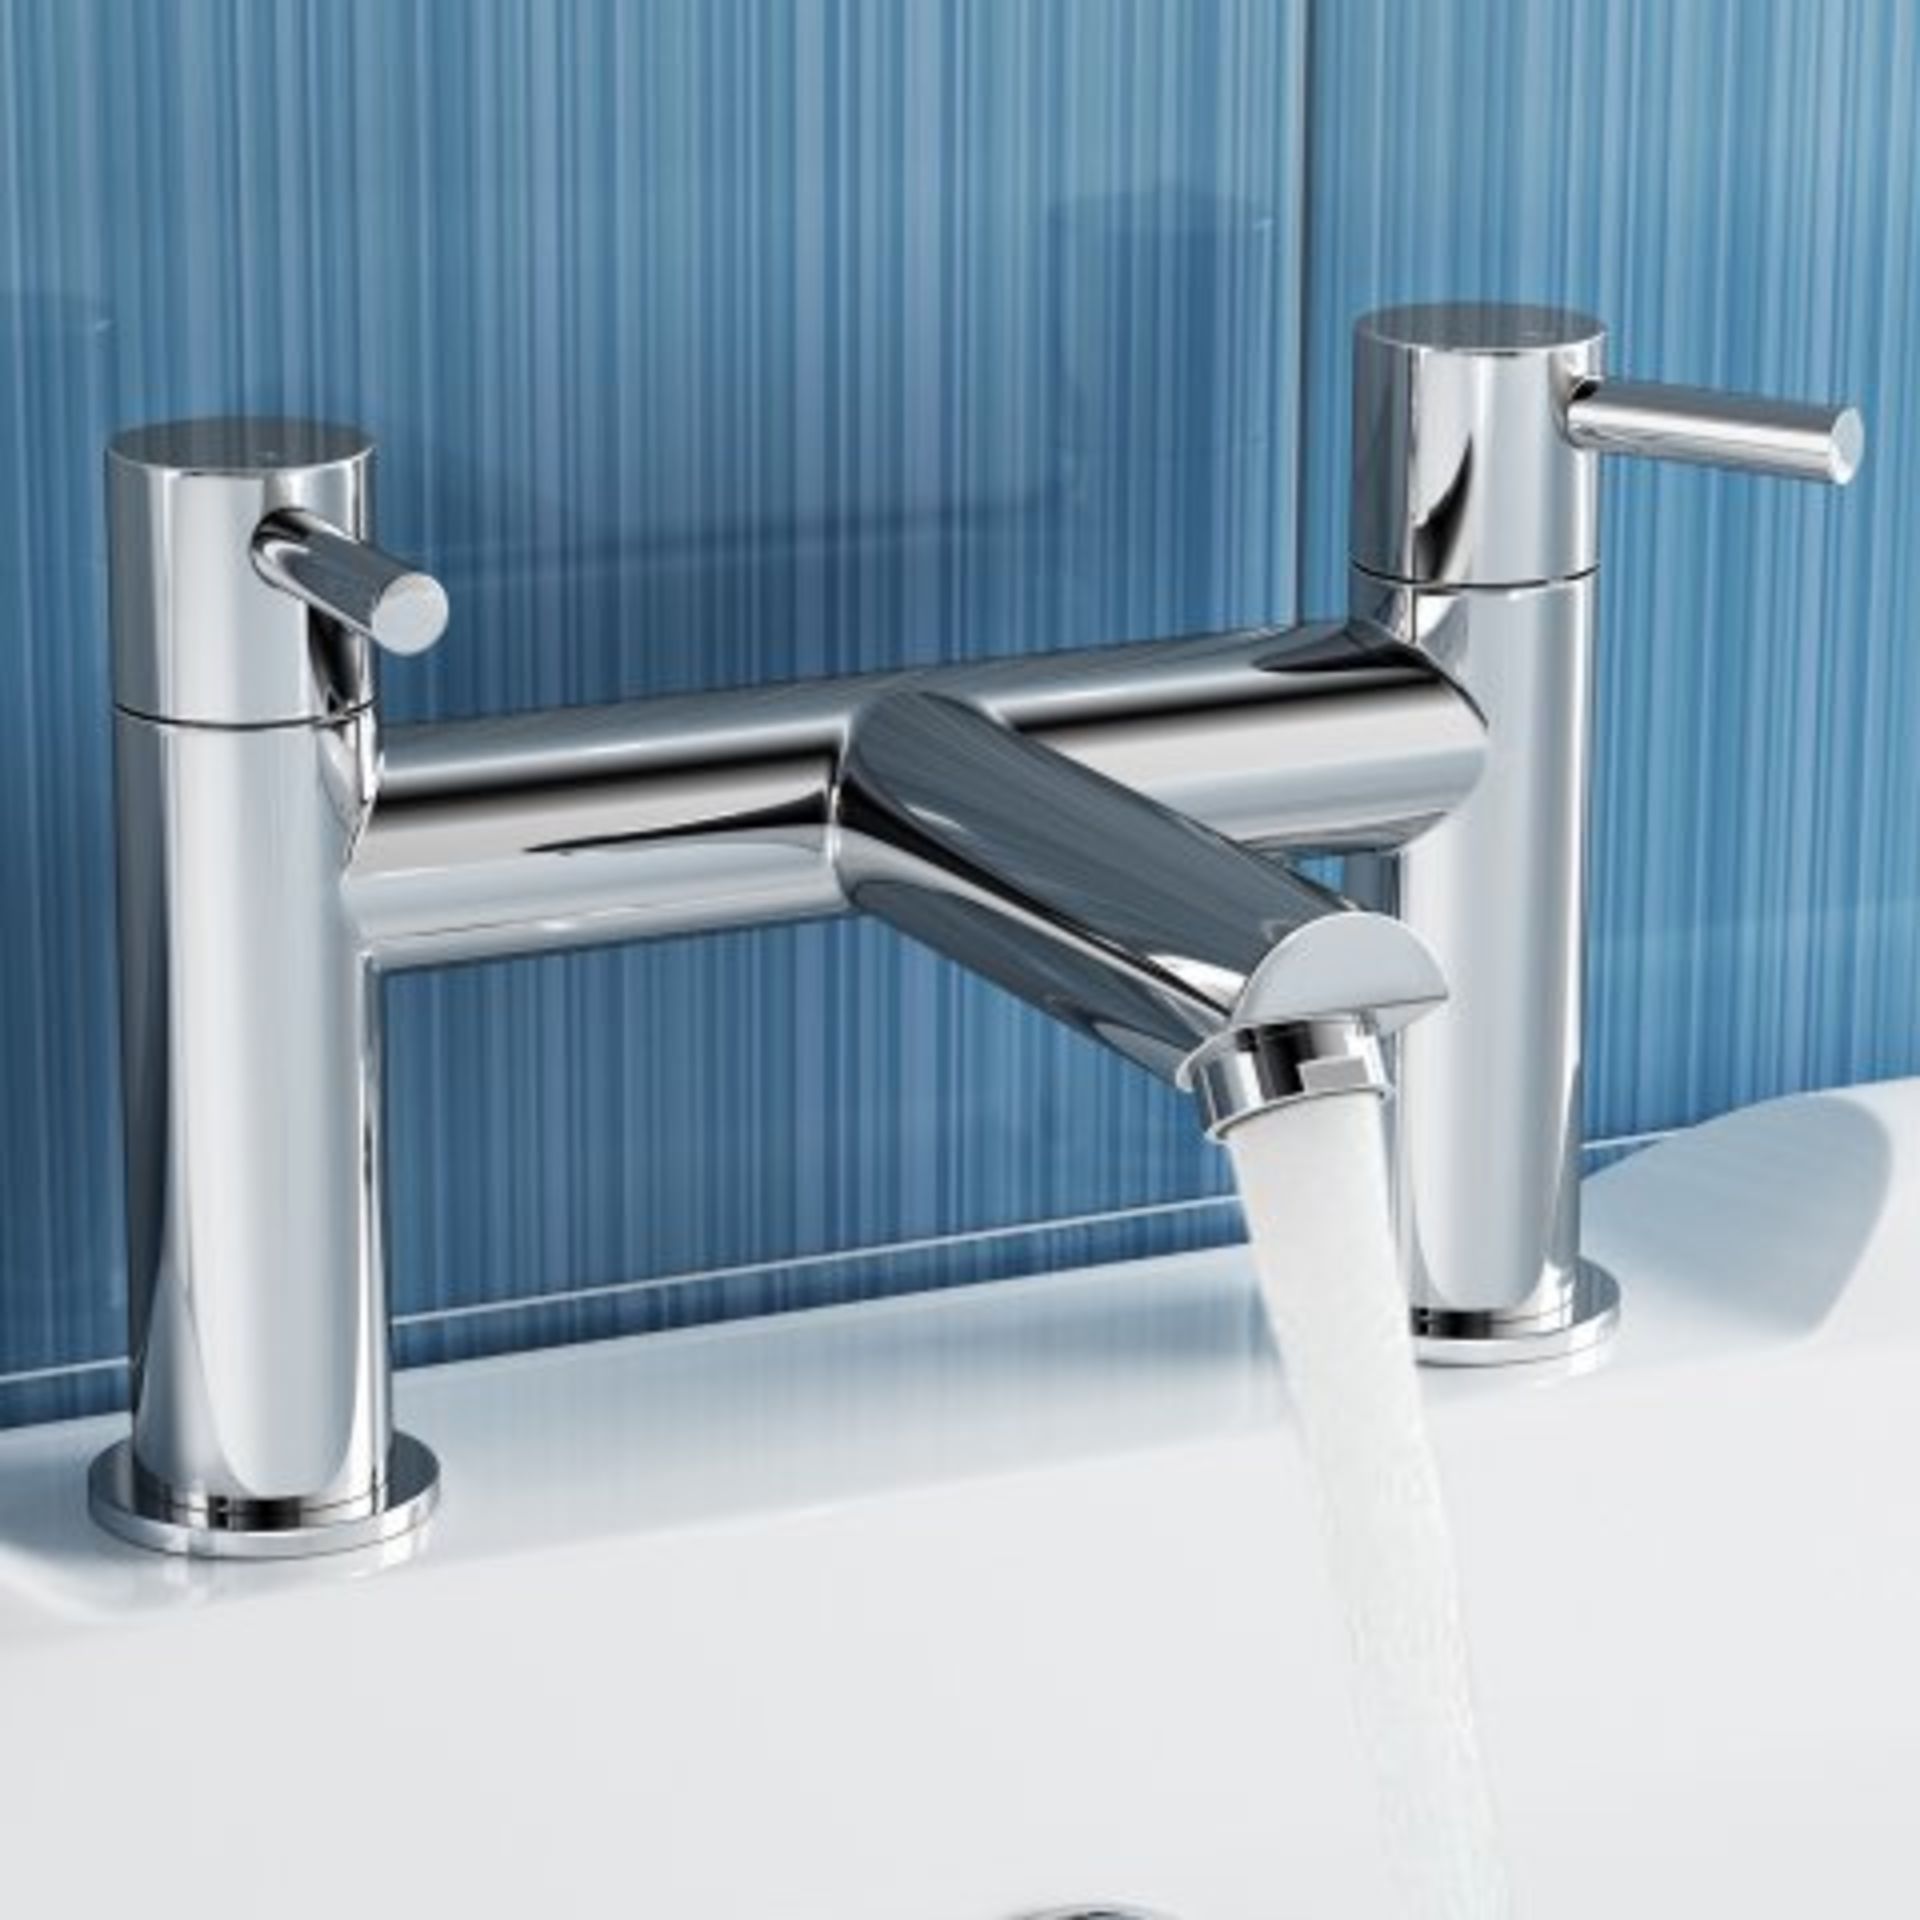 (A23) Gladstone II Bath Filler Mixer Tap Presenting a contemporary design, this solid brass tap